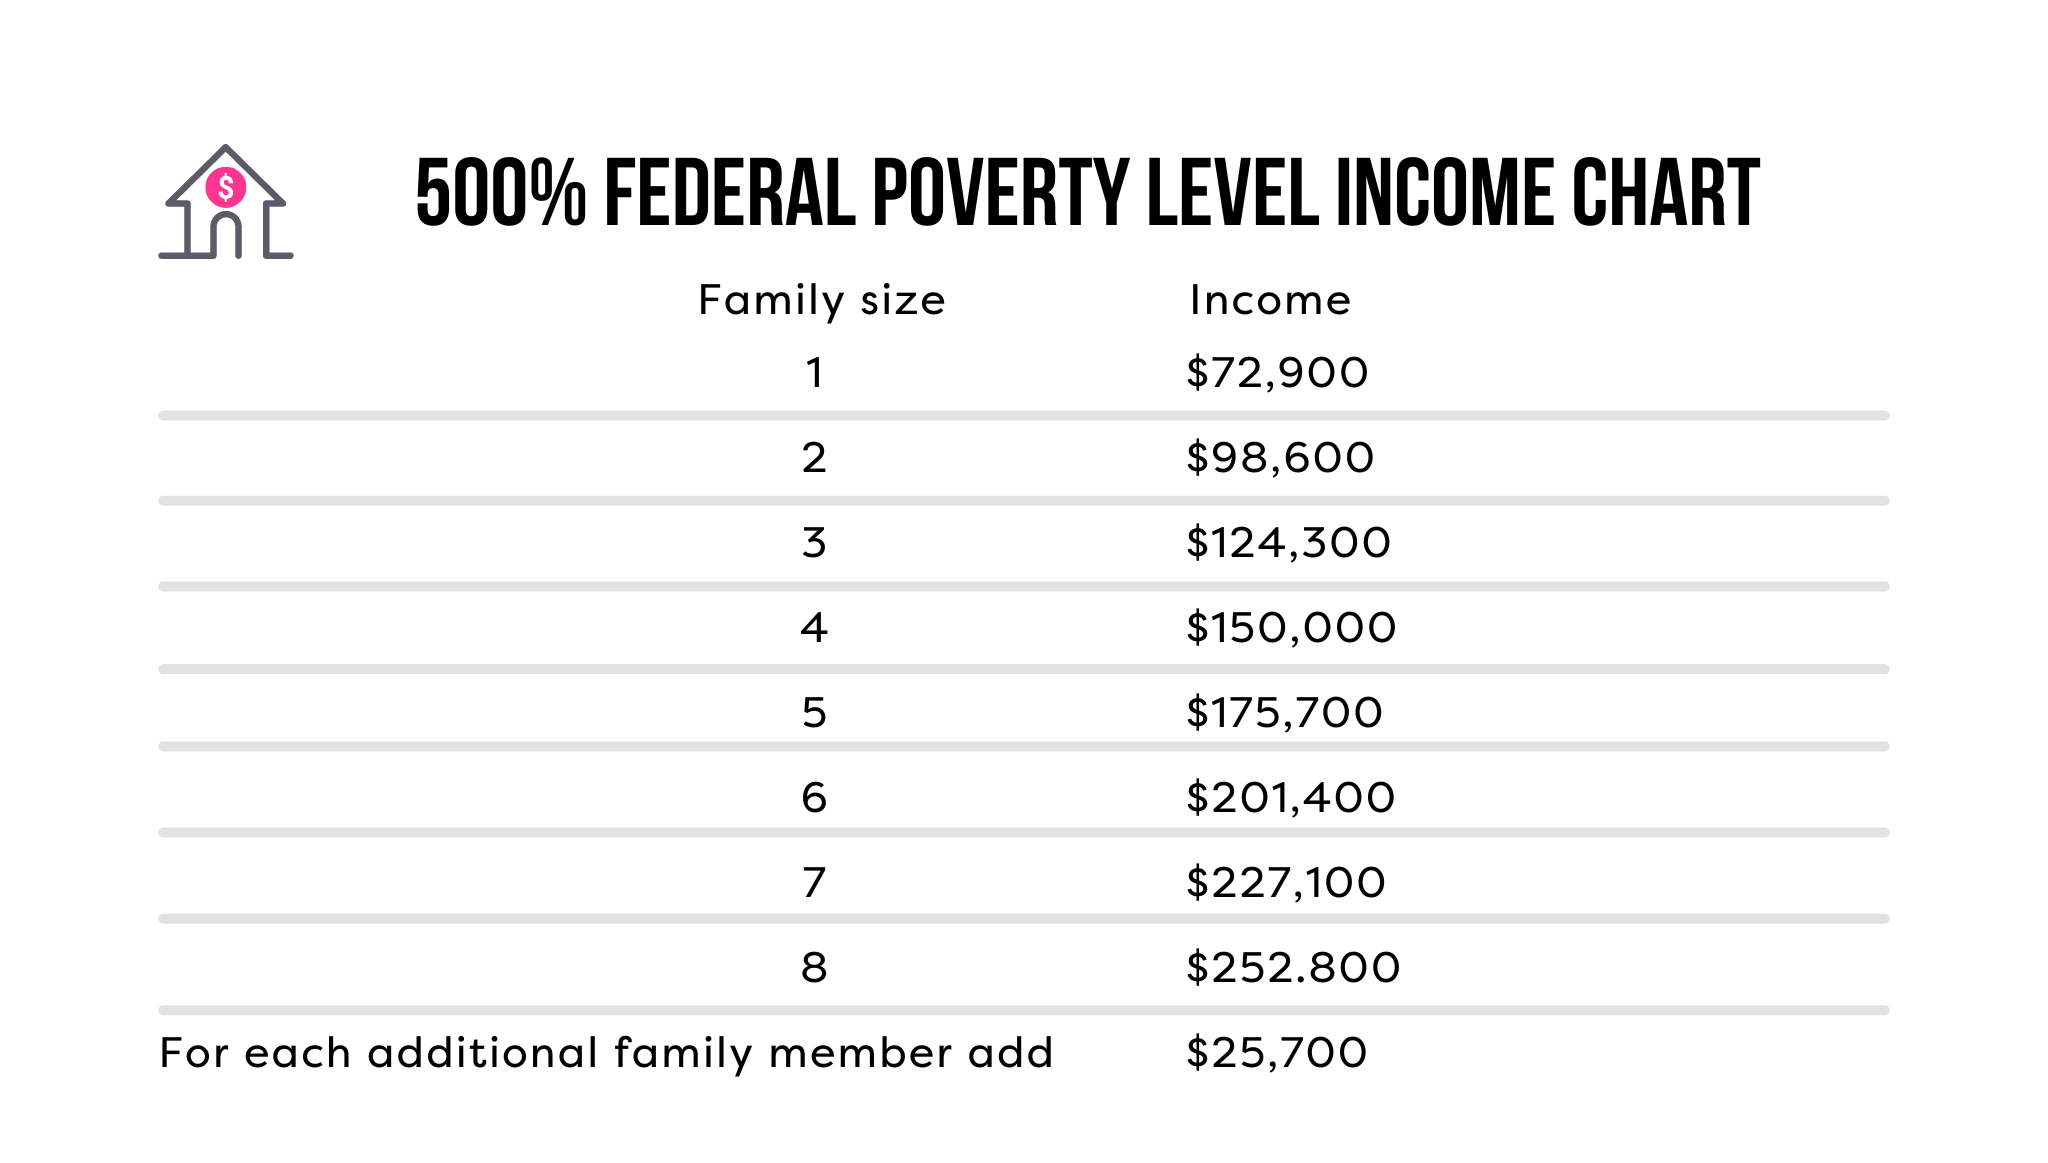 2023 Poverty Guidelines Household size/Income 1 $72,900 2 $98,600 3 $124,300 4 $150,000 5 $175,700 6 $201,400 7 $227,100 8 $252,800 